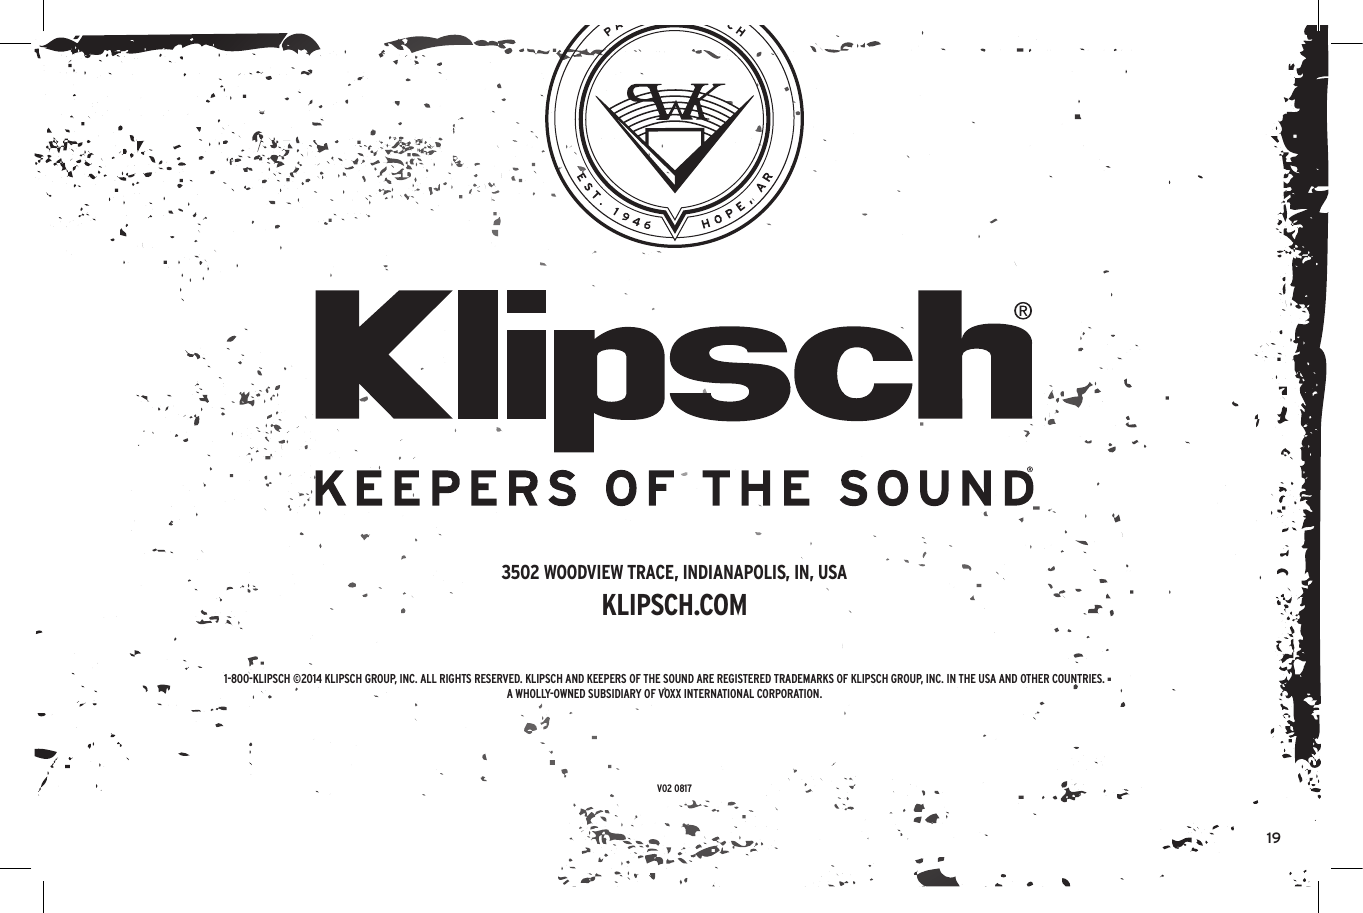 191-800-KLIPSCH ©2014 KLIPSCH GROUP, INC. ALL RIGHTS RESERVED. KLIPSCH AND KEEPERS OF THE SOUND ARE REGISTERED TRADEMARKS OF KLIPSCH GROUP, INC. IN THE USA AND OTHER COUNTRIES.A WHOLLY-OWNED SUBSIDIARY OF VOXX INTERNATIONAL CORPORATION.3502 WOODVIEW TRACE, INDIANAPOLIS, IN, USAKLIPSCH.COMV02 0817